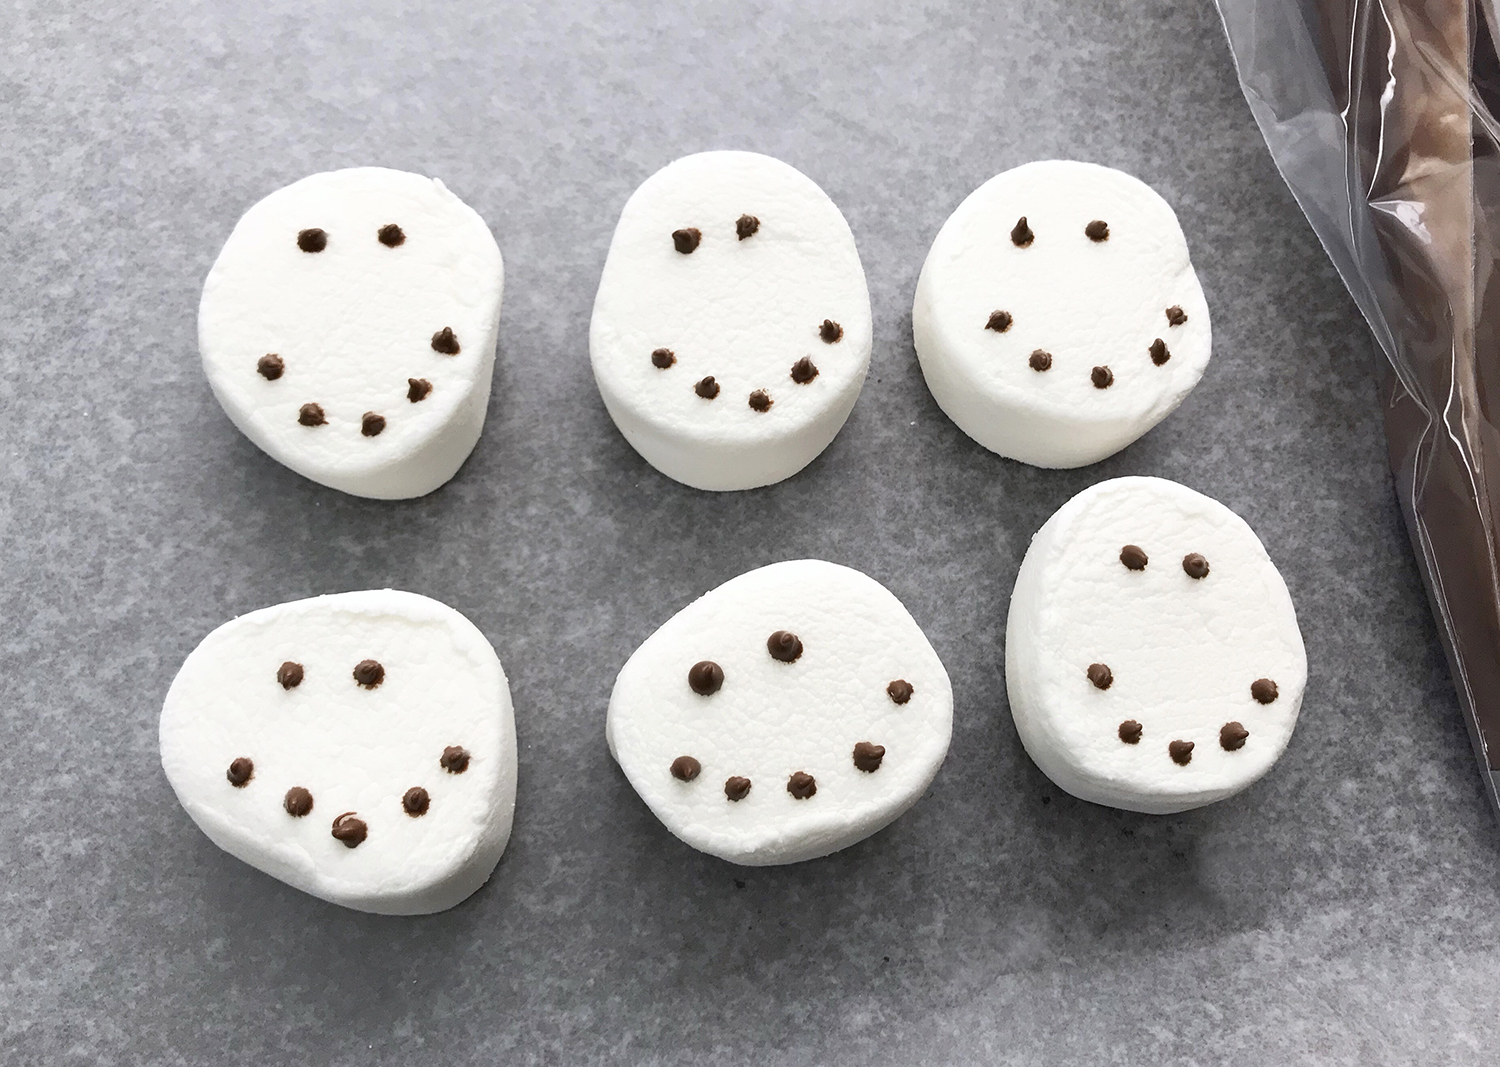 decorating marshmallows with snowman faces